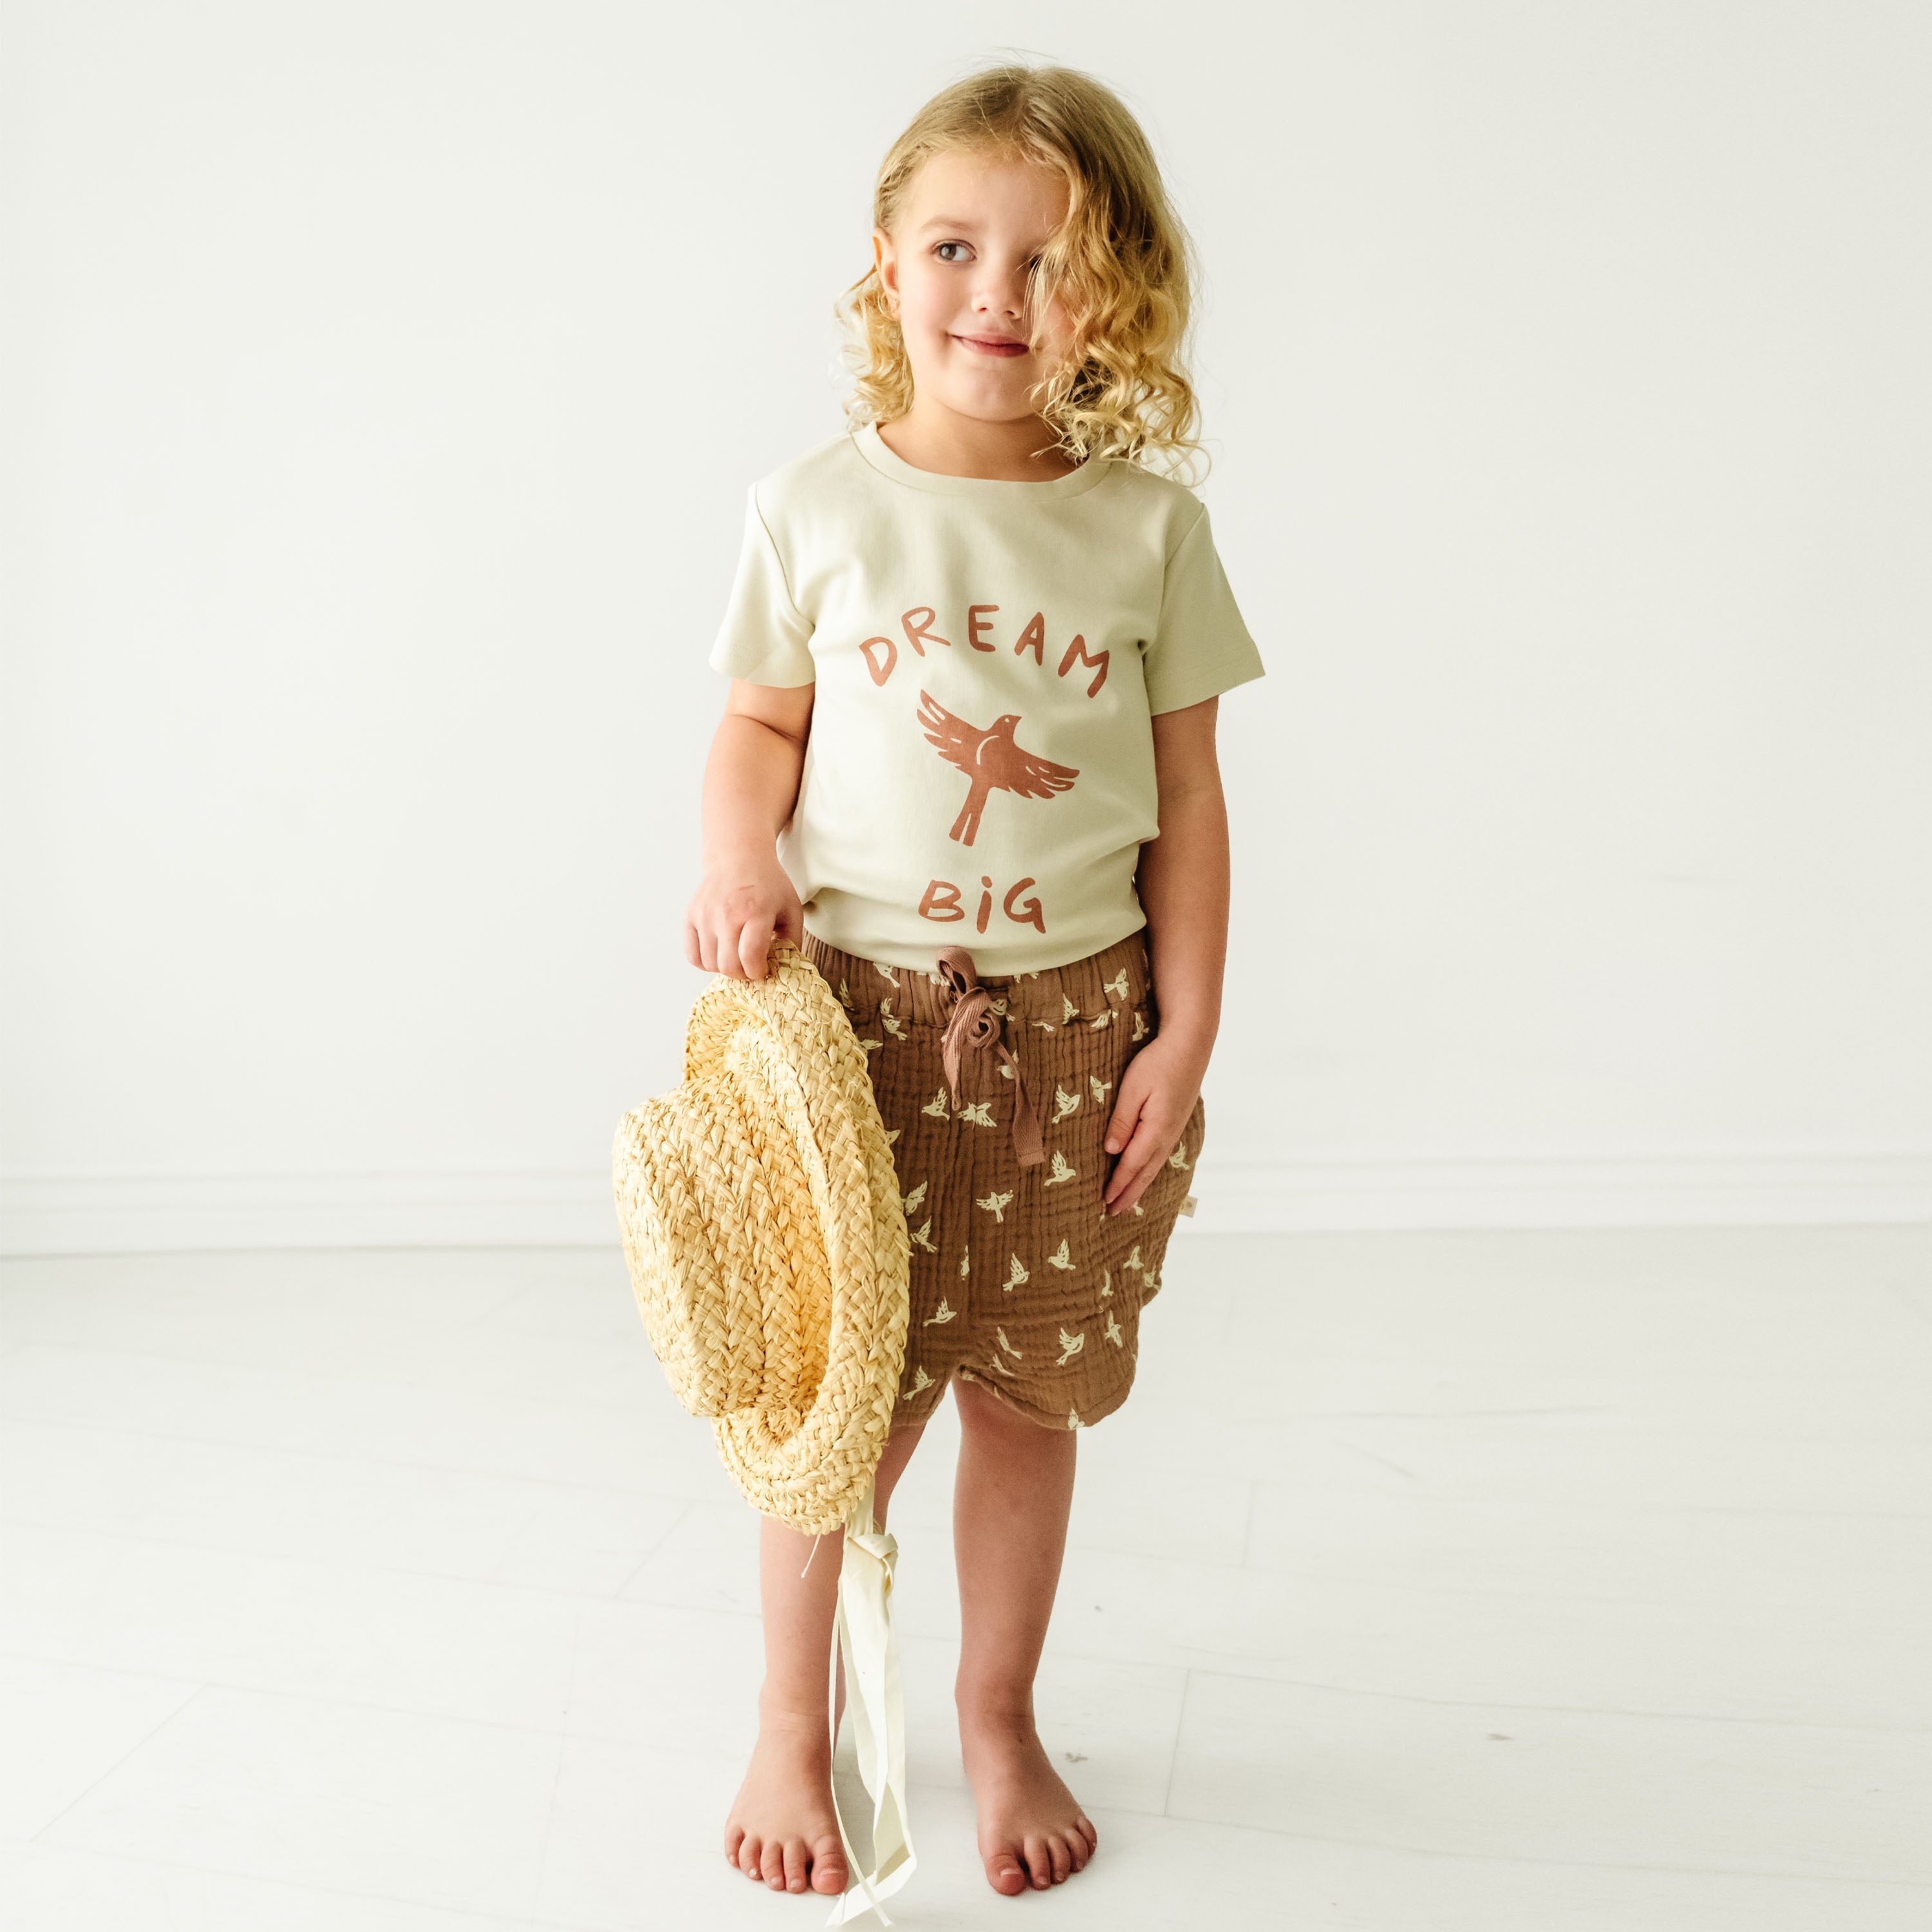 A young toddler with curly hair, wearing a cream Organic Crew Neck Tee - Dream Big t-shirt and brown shorts, stands holding a straw hat against a plain white background by Makemake Organics.